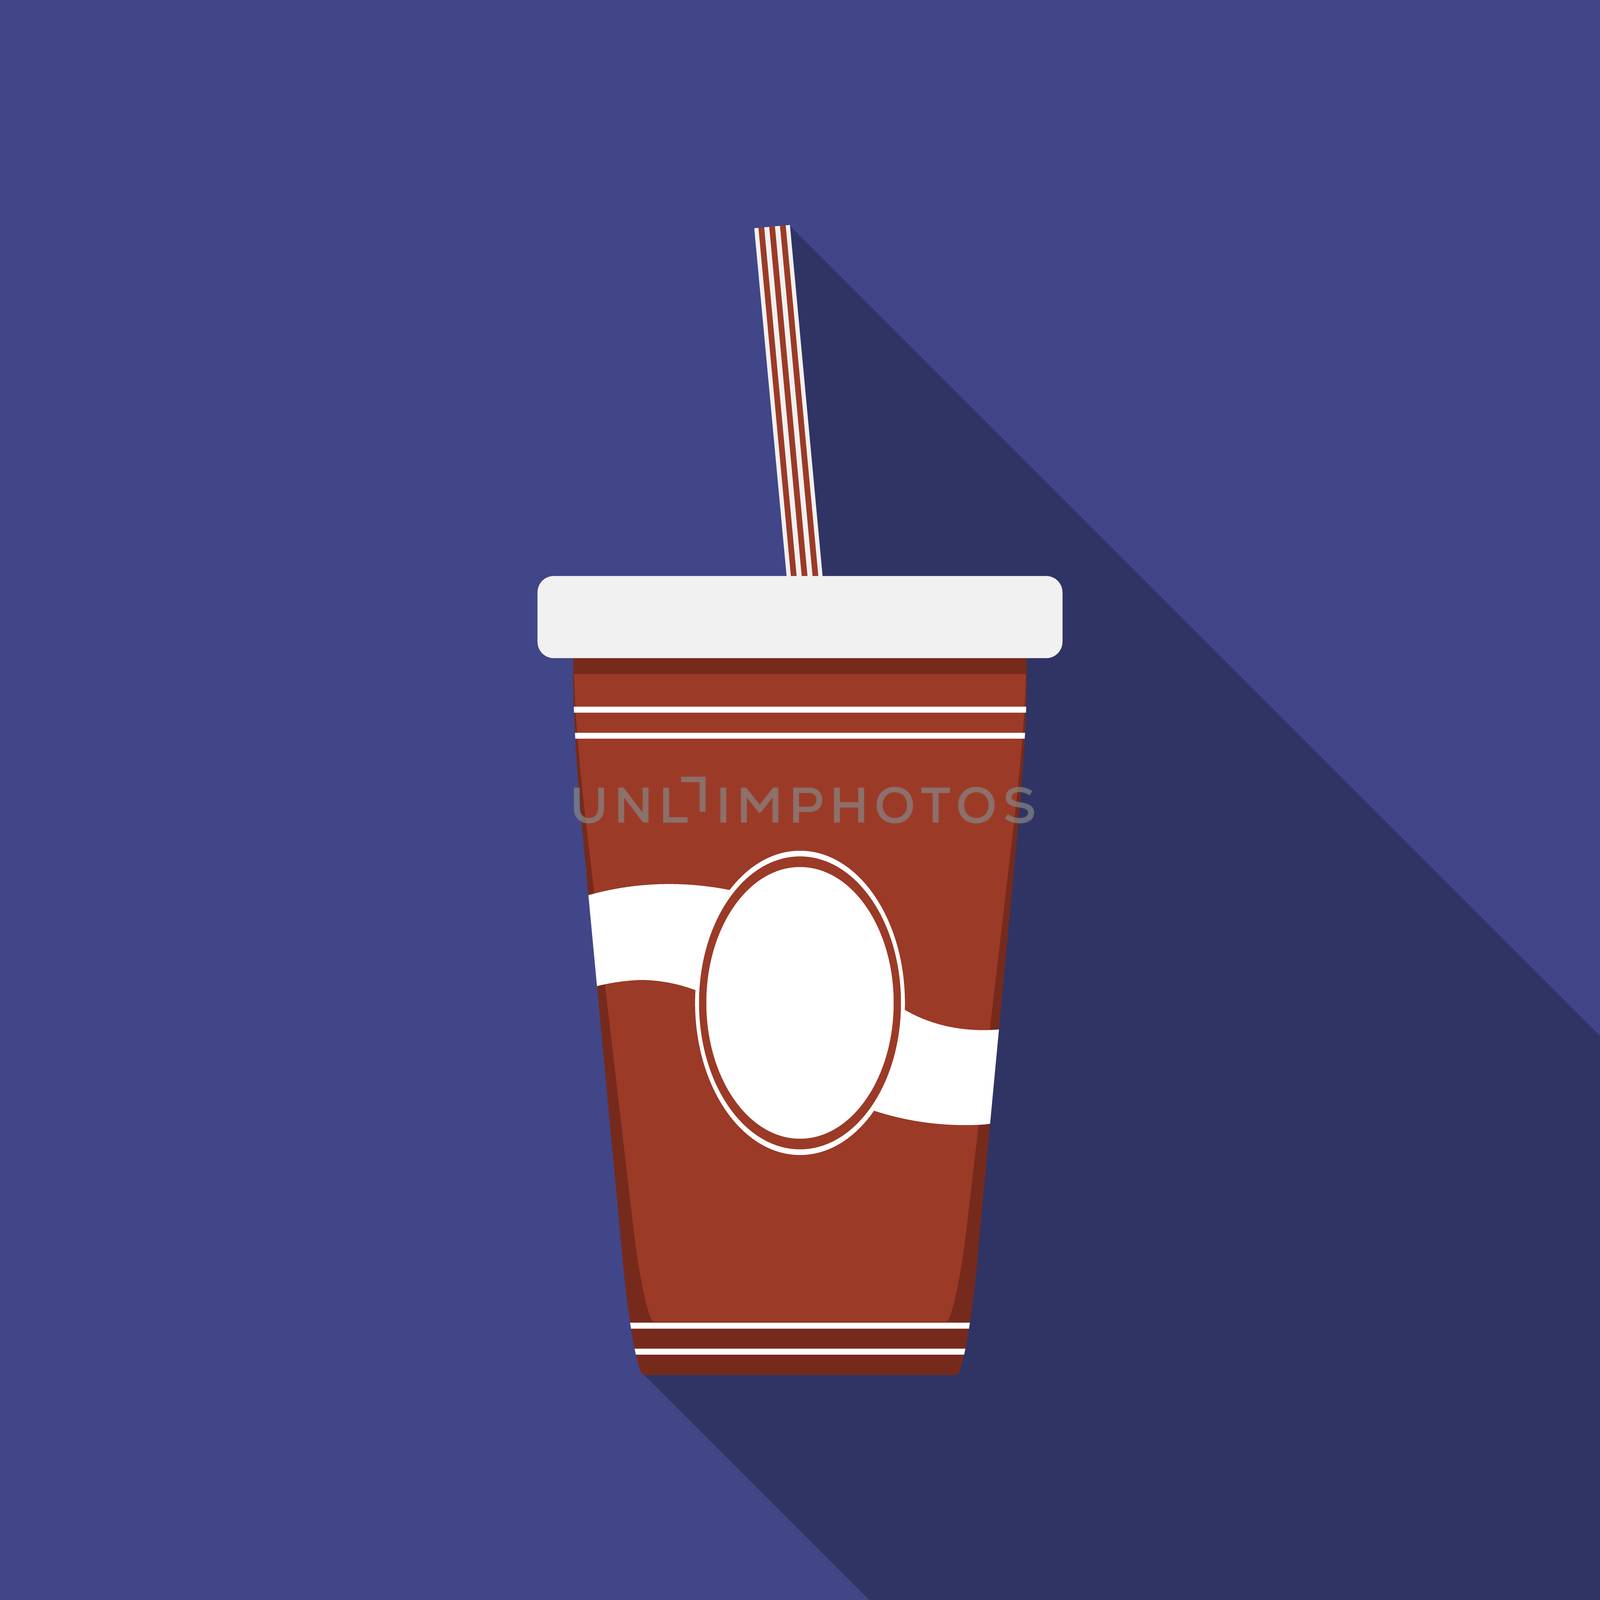 Flat design modern vector illustration of drink icon with long shadow by Lemon_workshop